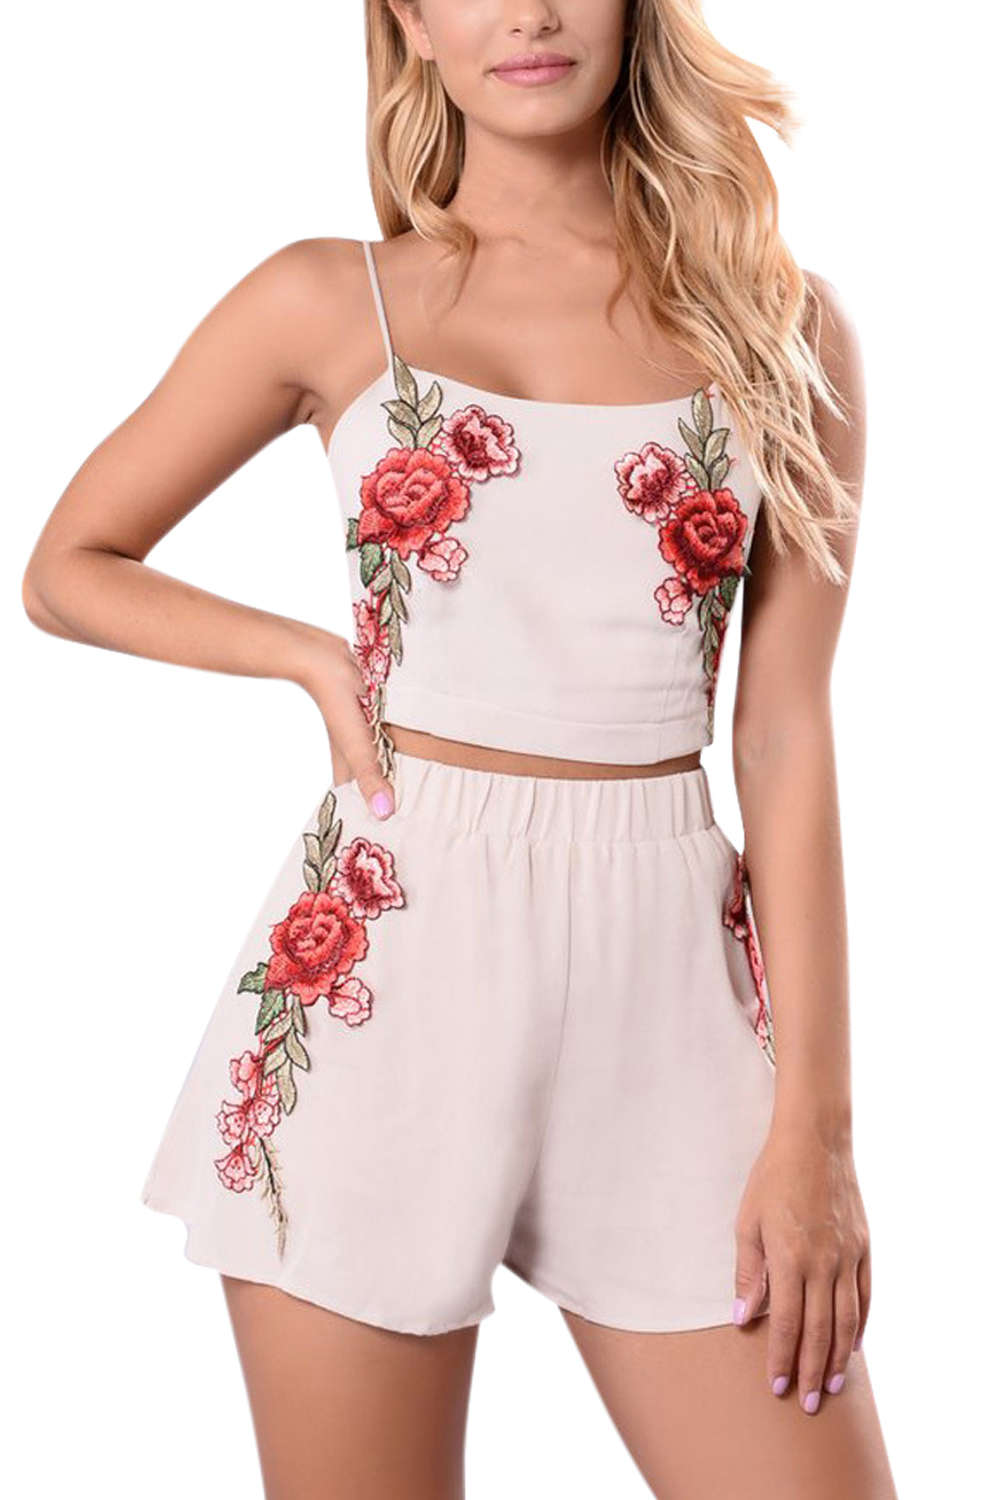 Iyasson Floral Embroidered Sexy Sling Slim Shorts Set